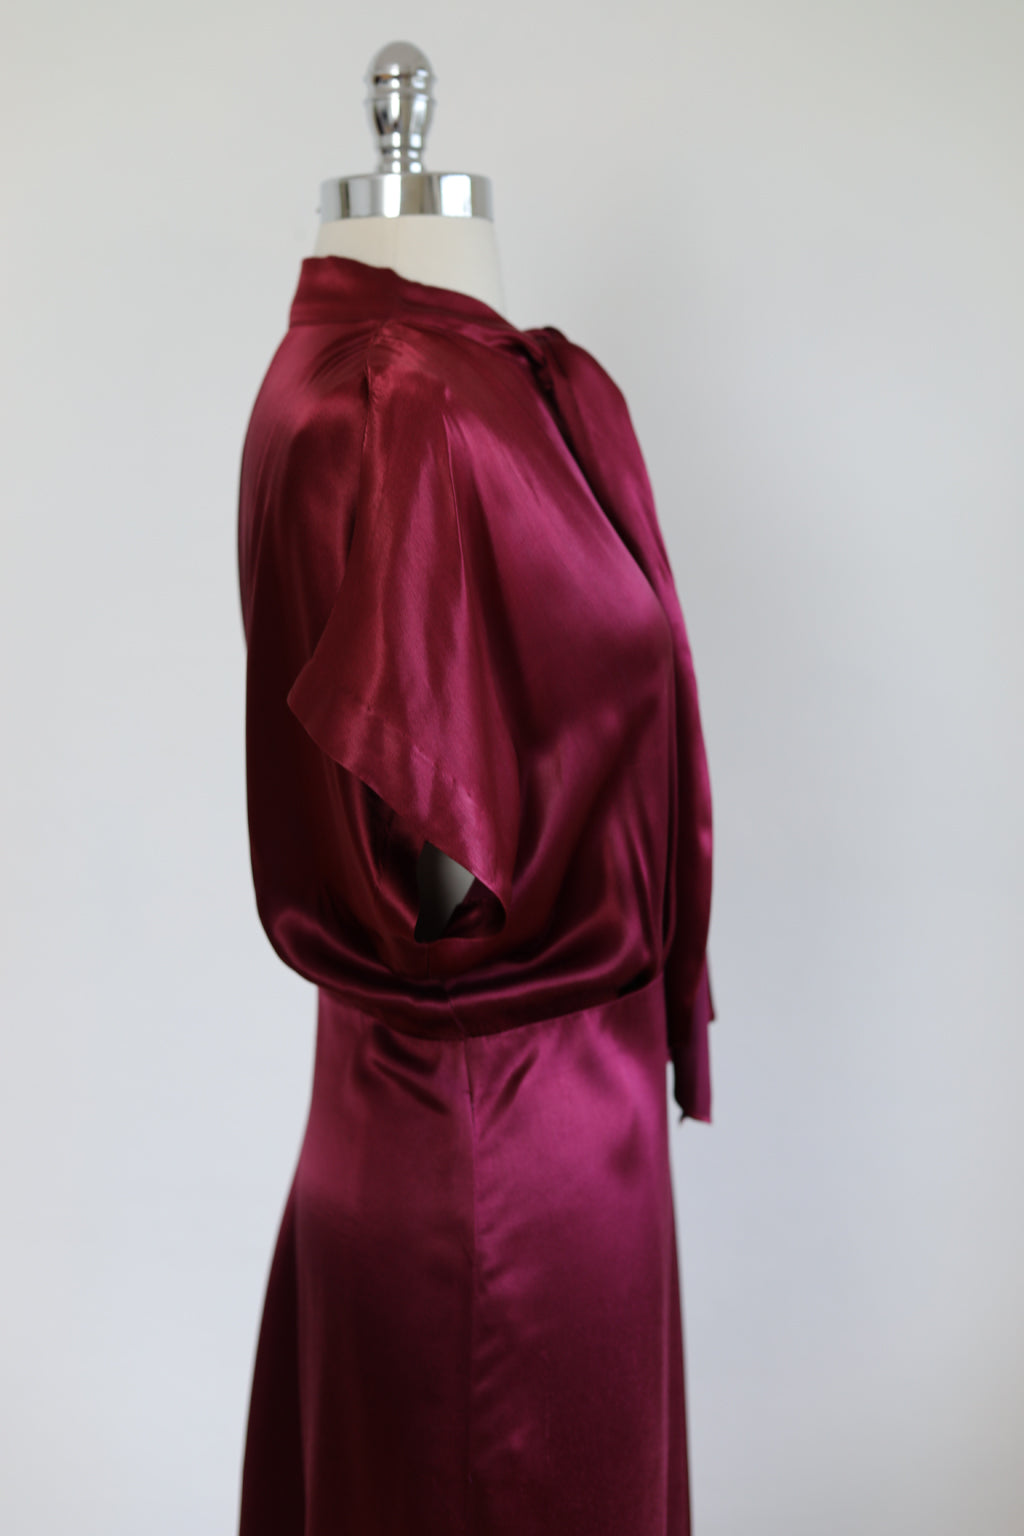 Vintage 1940s GLOSSY Satin Dress - Beautifully Shiny Claret-Colored Cocktail Stunner w Neck Sashes Size L - XL